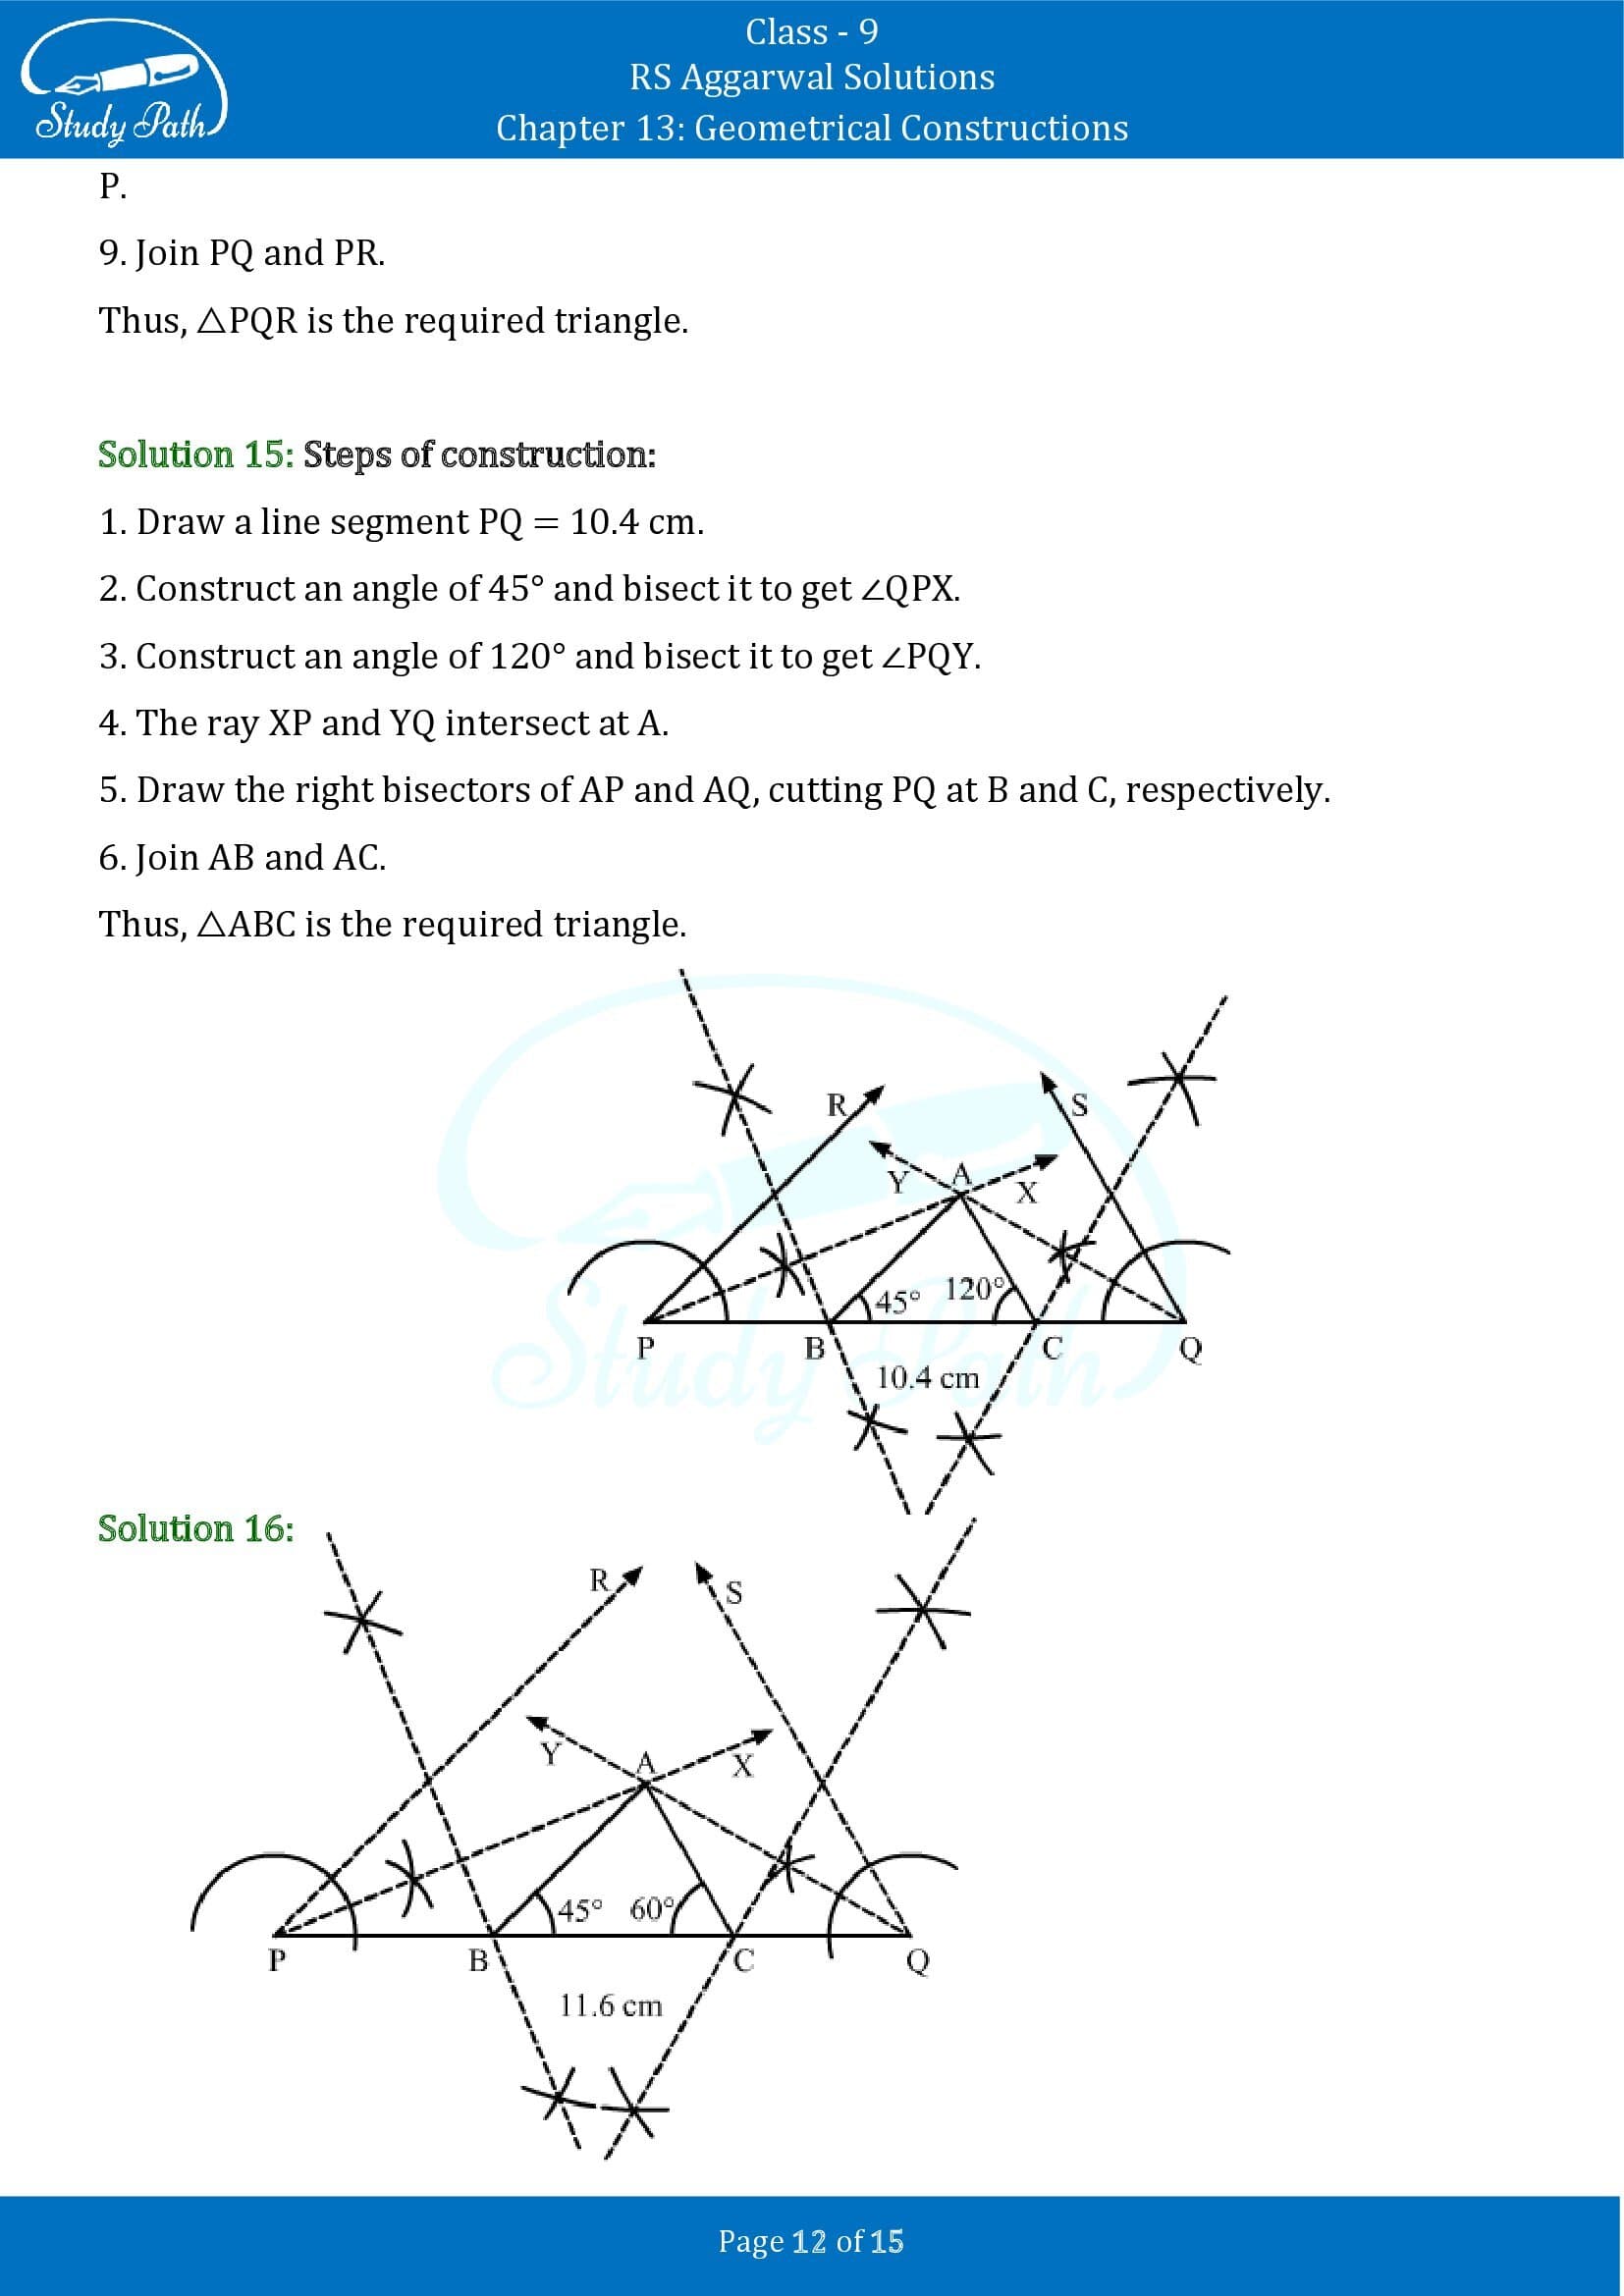 RS Aggarwal Solutions Class 9 Chapter 13 Geometrical Constructions 12